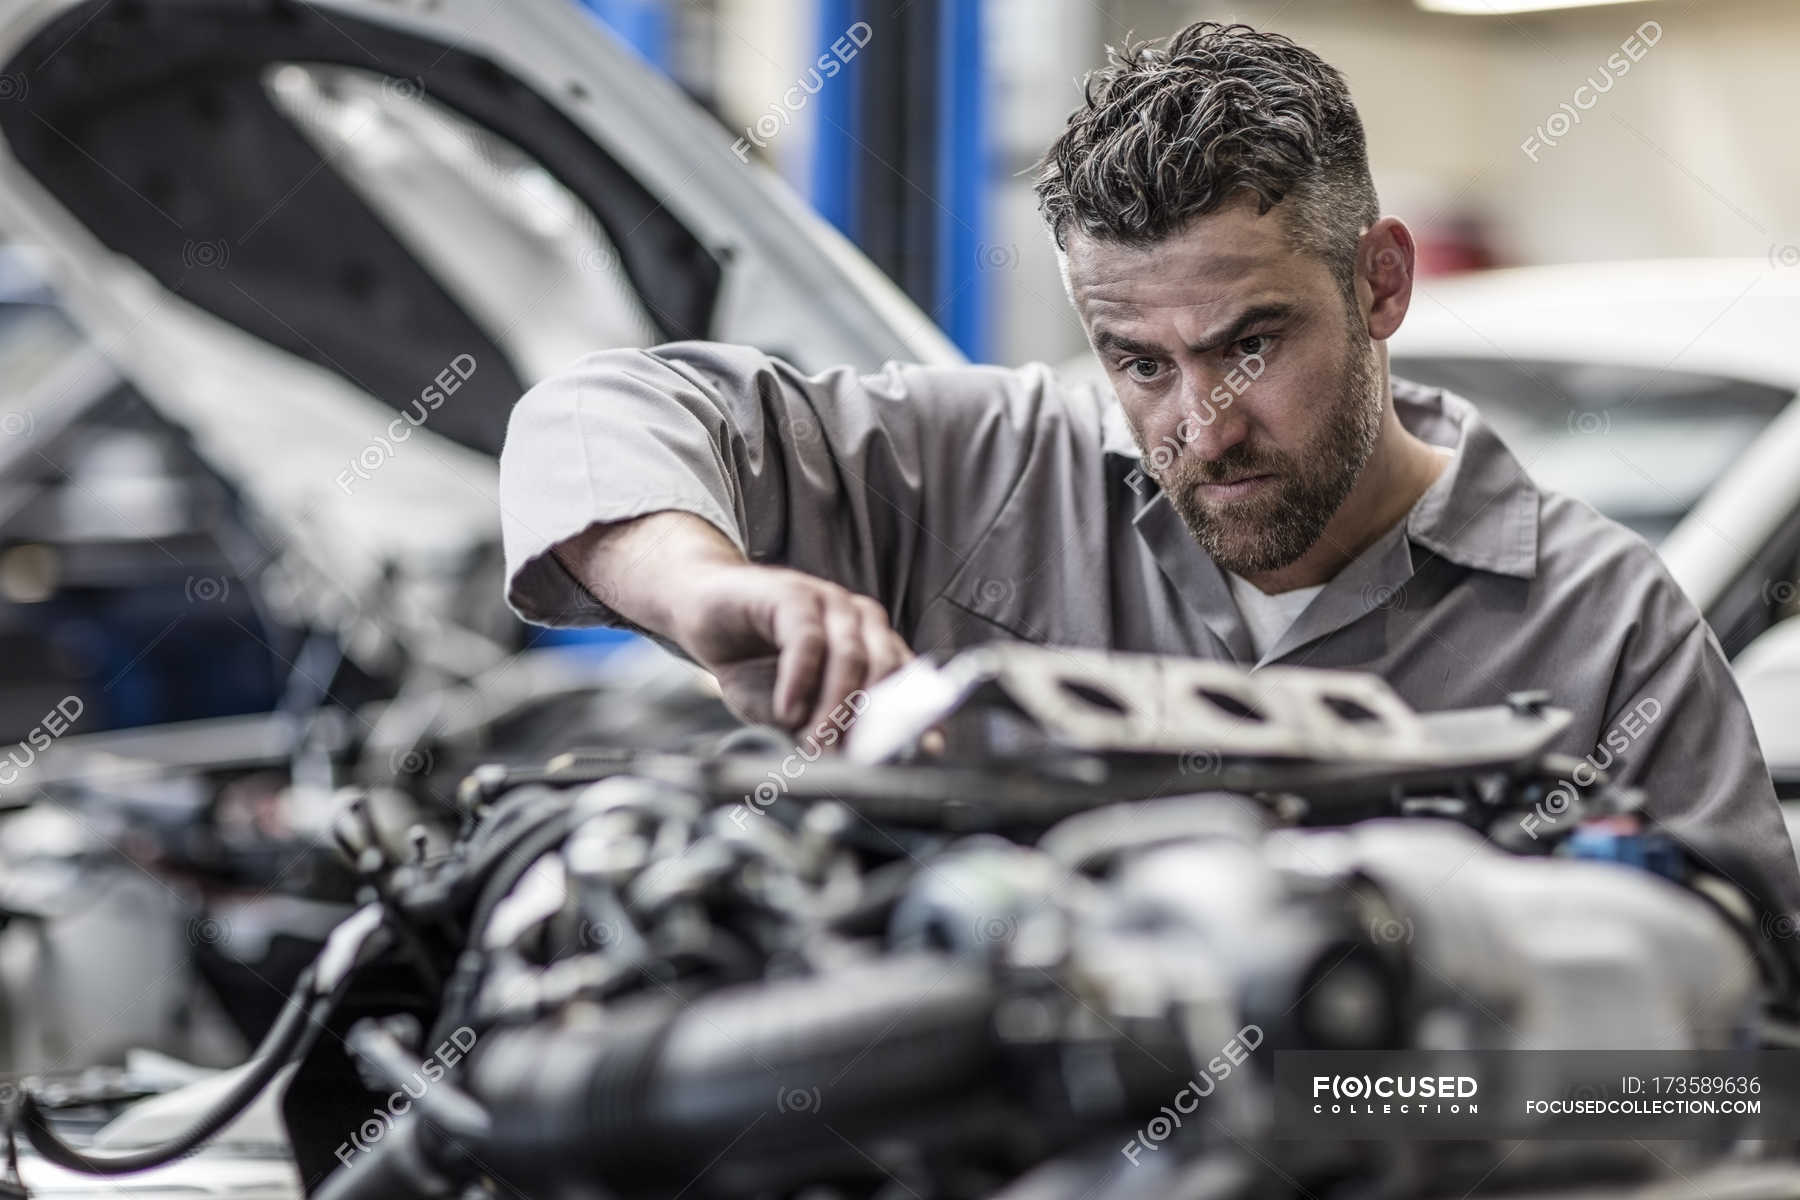 Car mechanic in a workshop working on engine — repair, overall - FocuseD 173589636 Stock Photo Car Mechanic Workshop Working Engine